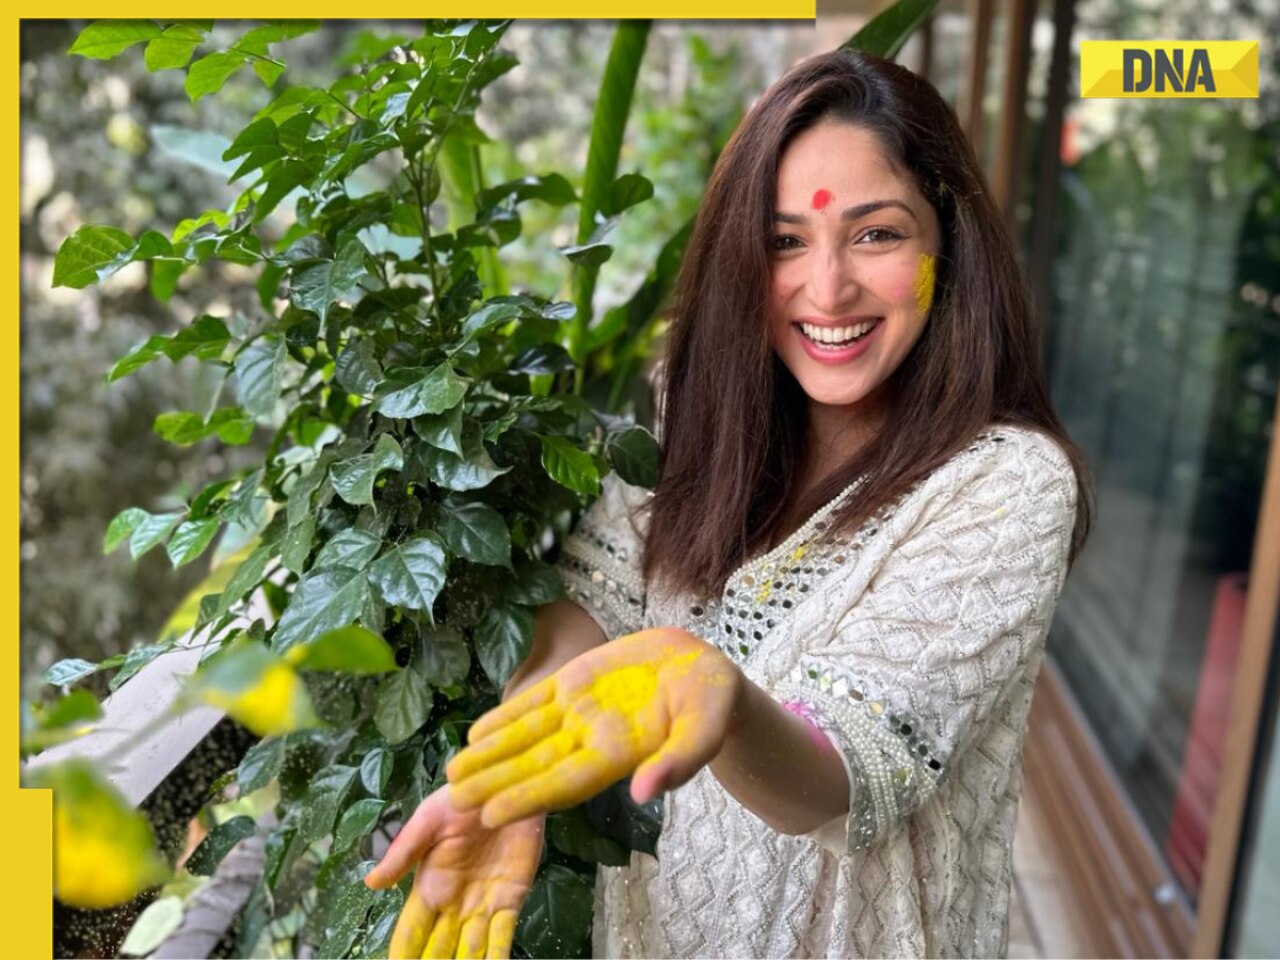 Yami Gautam on fondest Holi memories and festive traditions she, Aditya Dhar want to pass on to their child | Exclusive